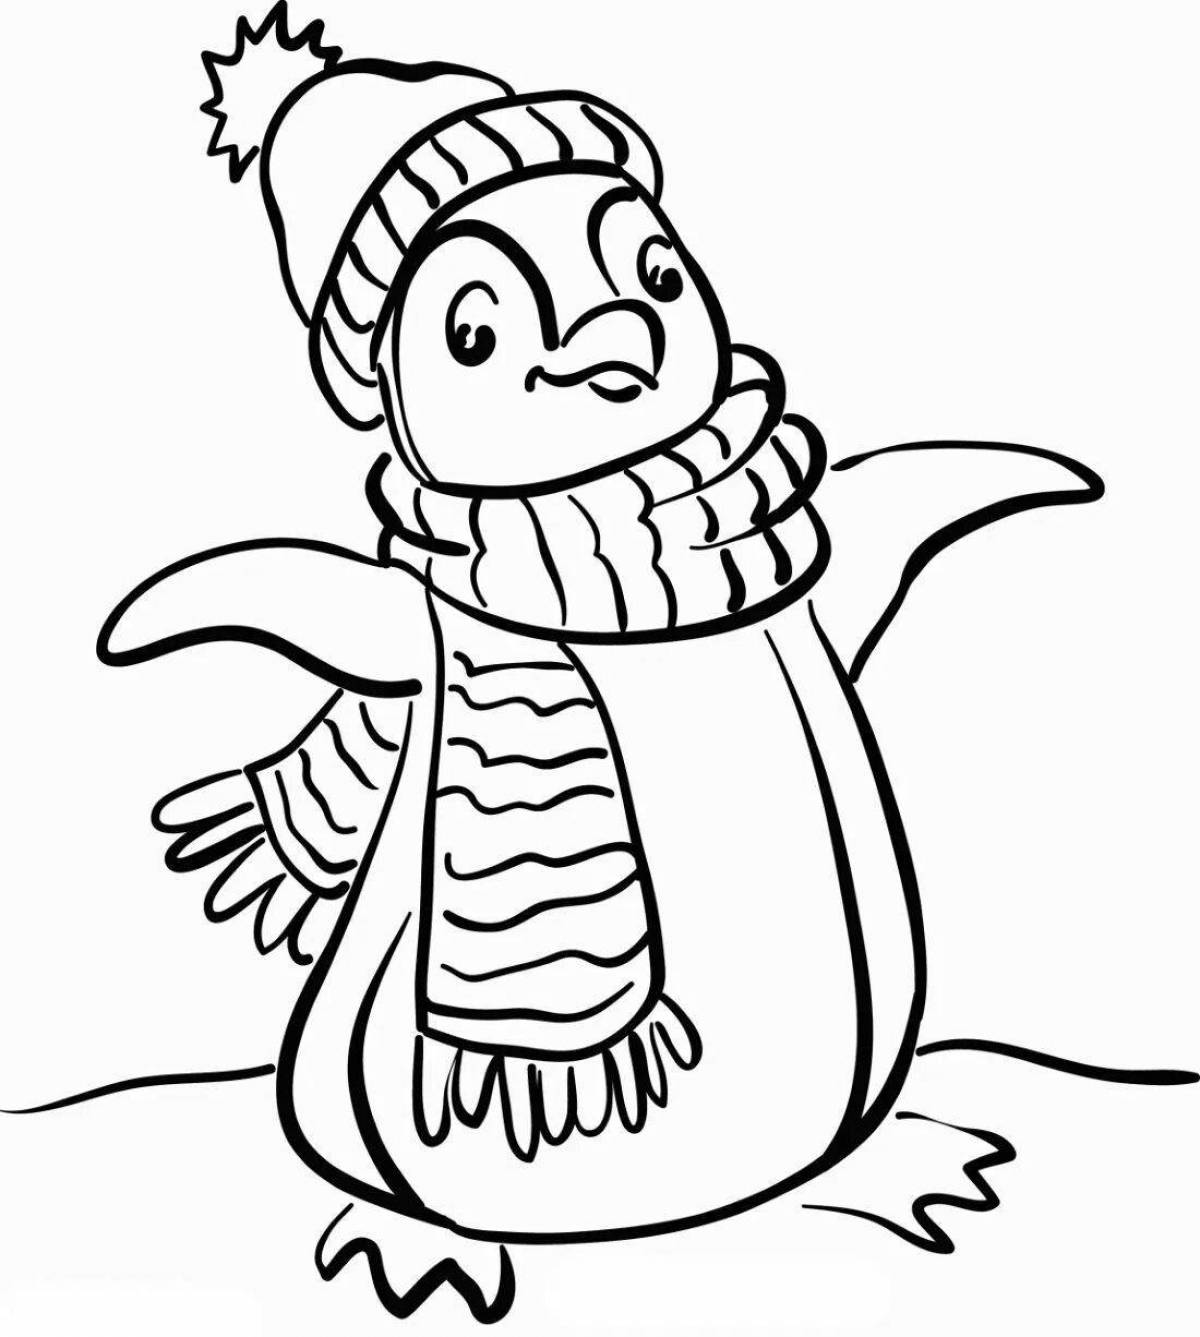 Glittering penguin coloring page